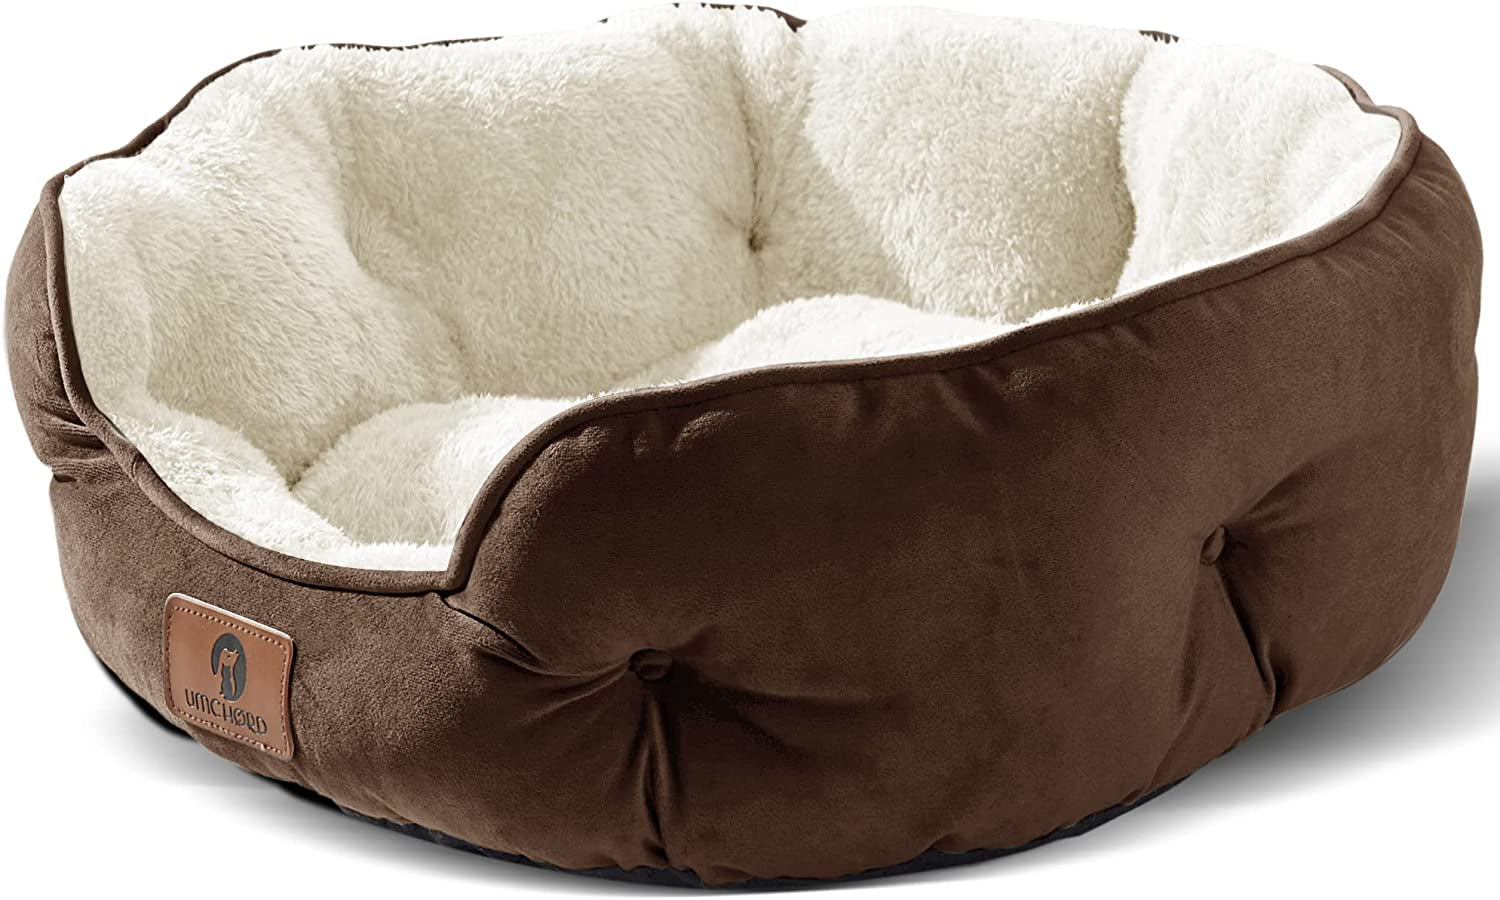 Cozy Retreat for Small Pets: Small Dog Bed and Cat Beds for Indoor Comfort - Extra Soft, Machine Washable, Anti-Slip, Water-Resistant Oxford Bottom in Elegant Brown (20 Inches)